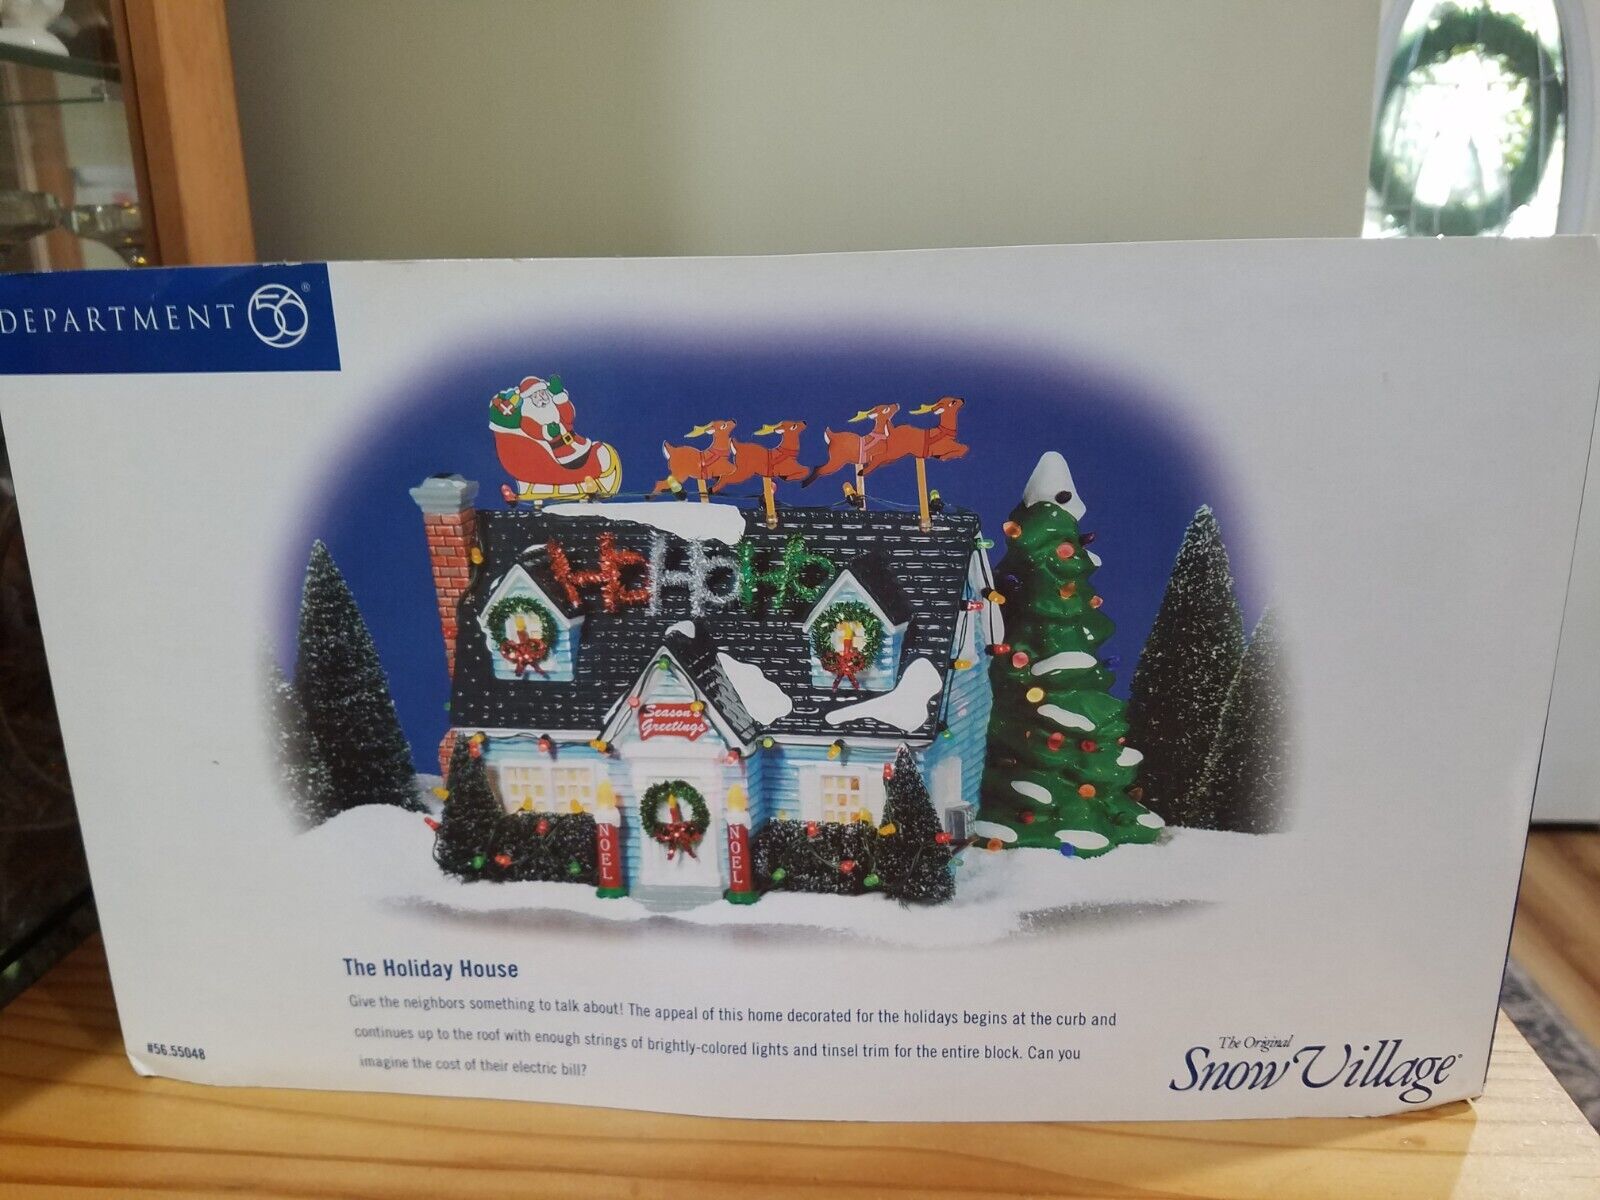 Department 56 The Holiday House #56.55048 The Original Snow Village Retired